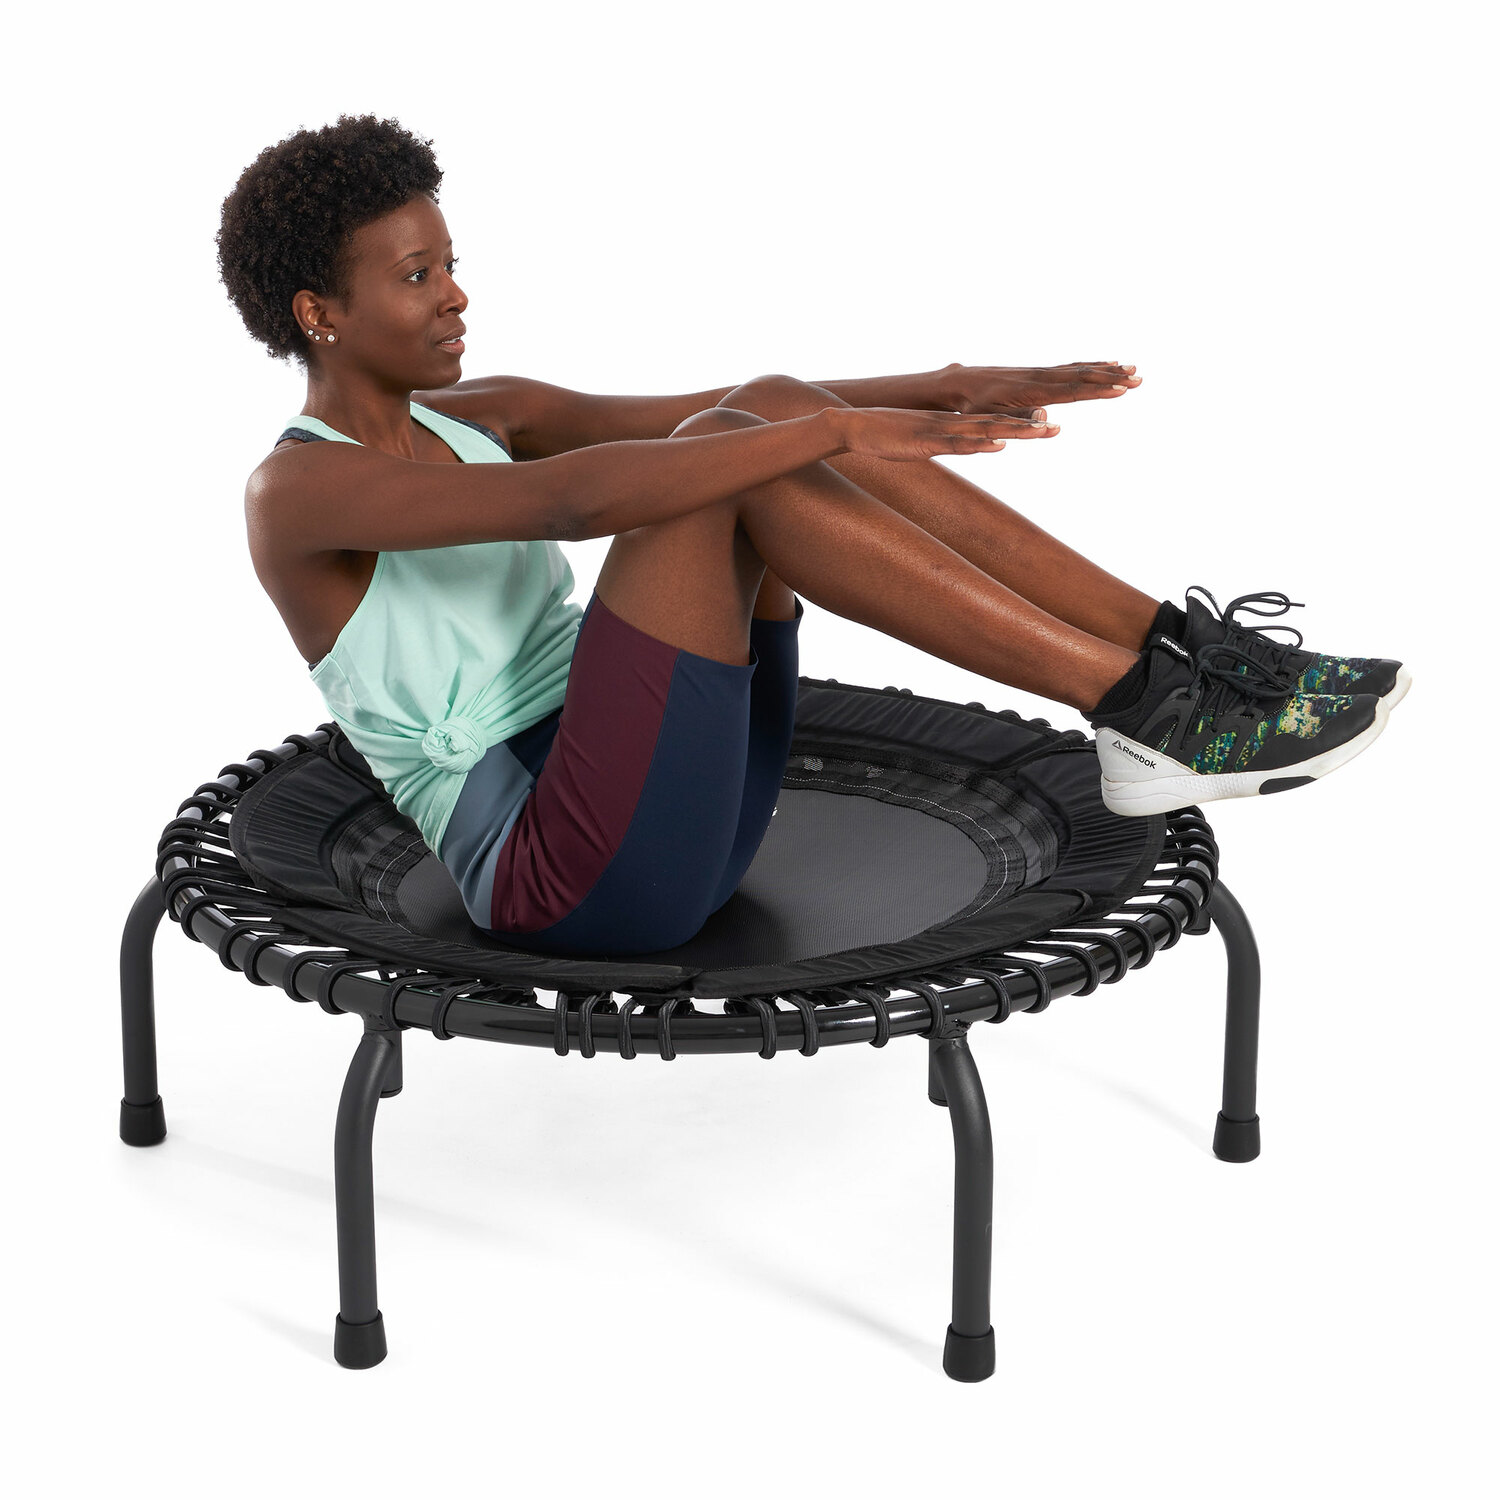 JumpSport 250 in-Home Cardio Fitness Rebounder, 39-inch | Mini Trampoline  with Arched-Legged & Videos Included | Safe, Sturdy and Low-Impact | DVD  and